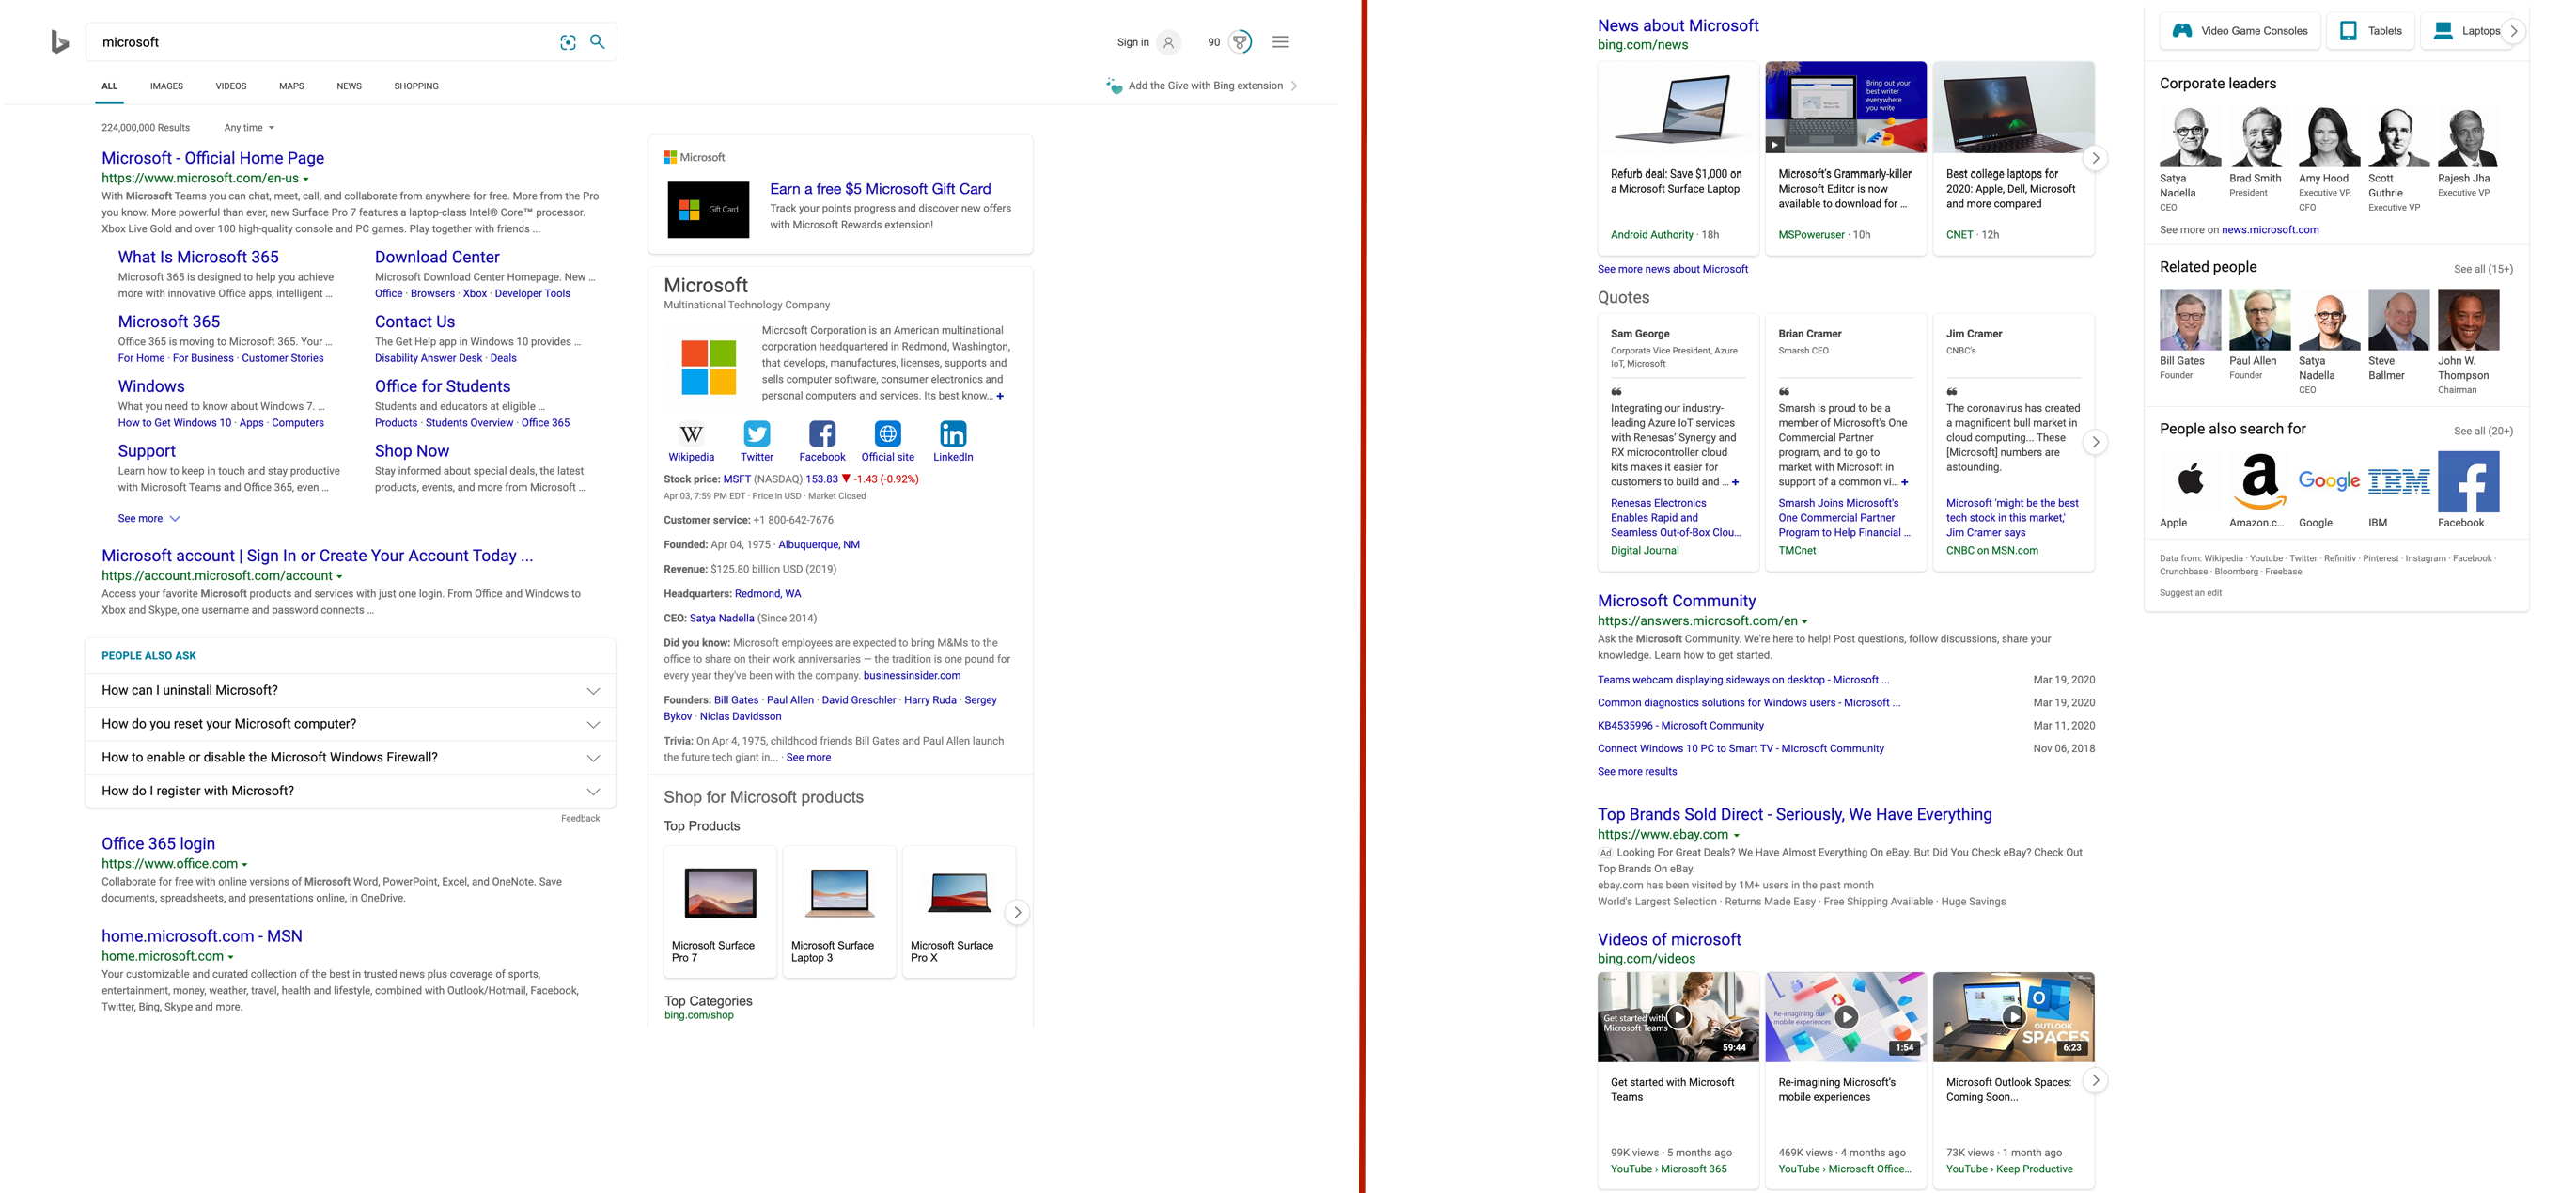 How Bing Ranks Search Results: Core Algorithm & Blue Links